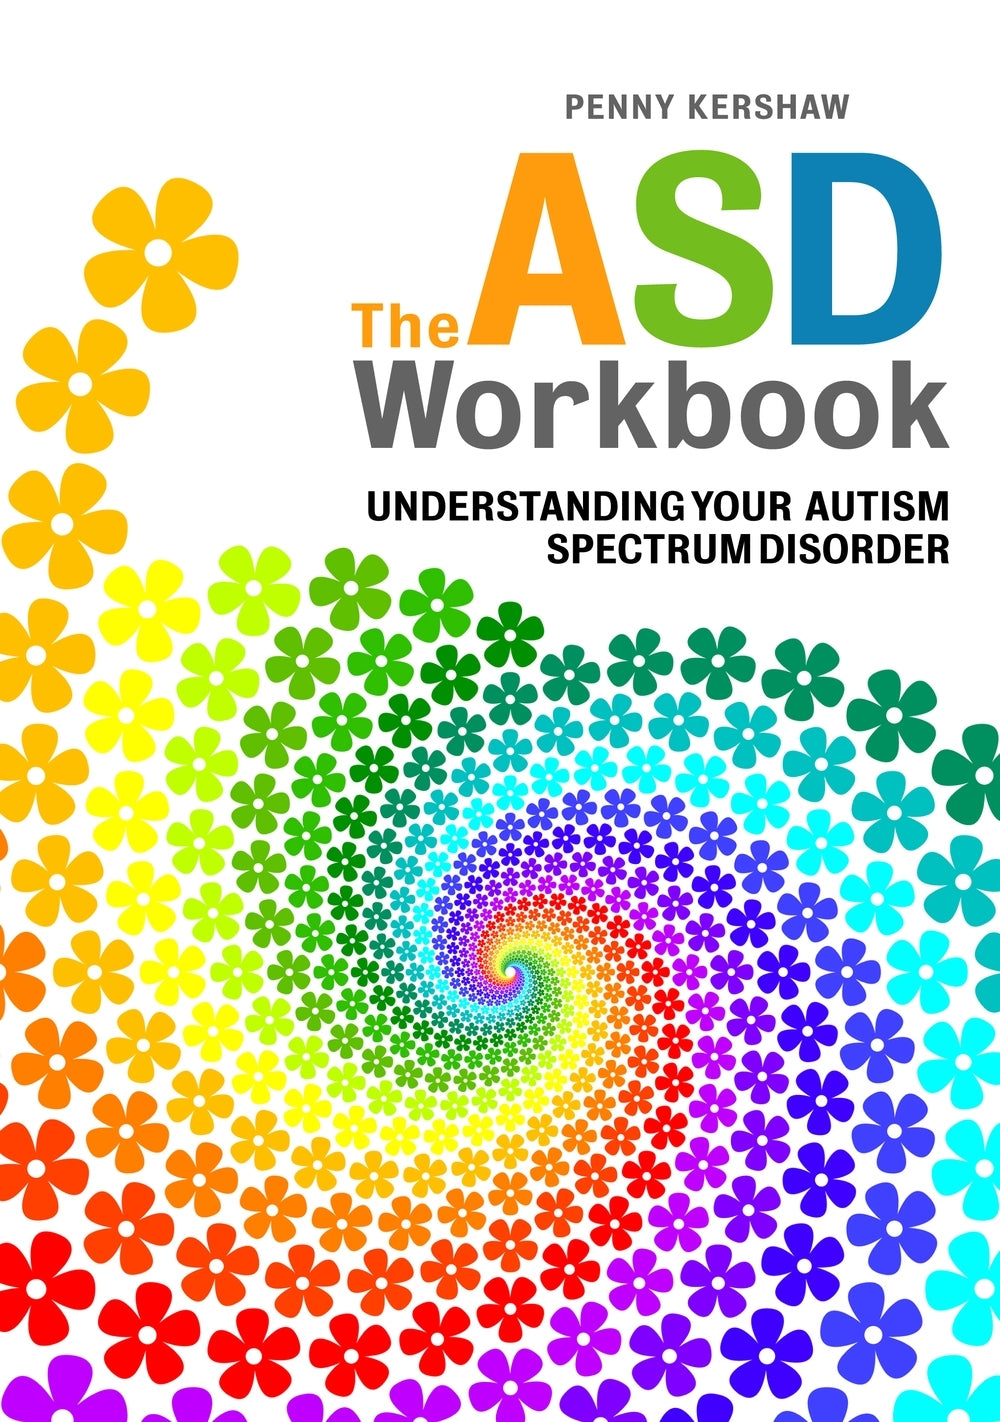 The ASD Workbook by Penny Kershaw